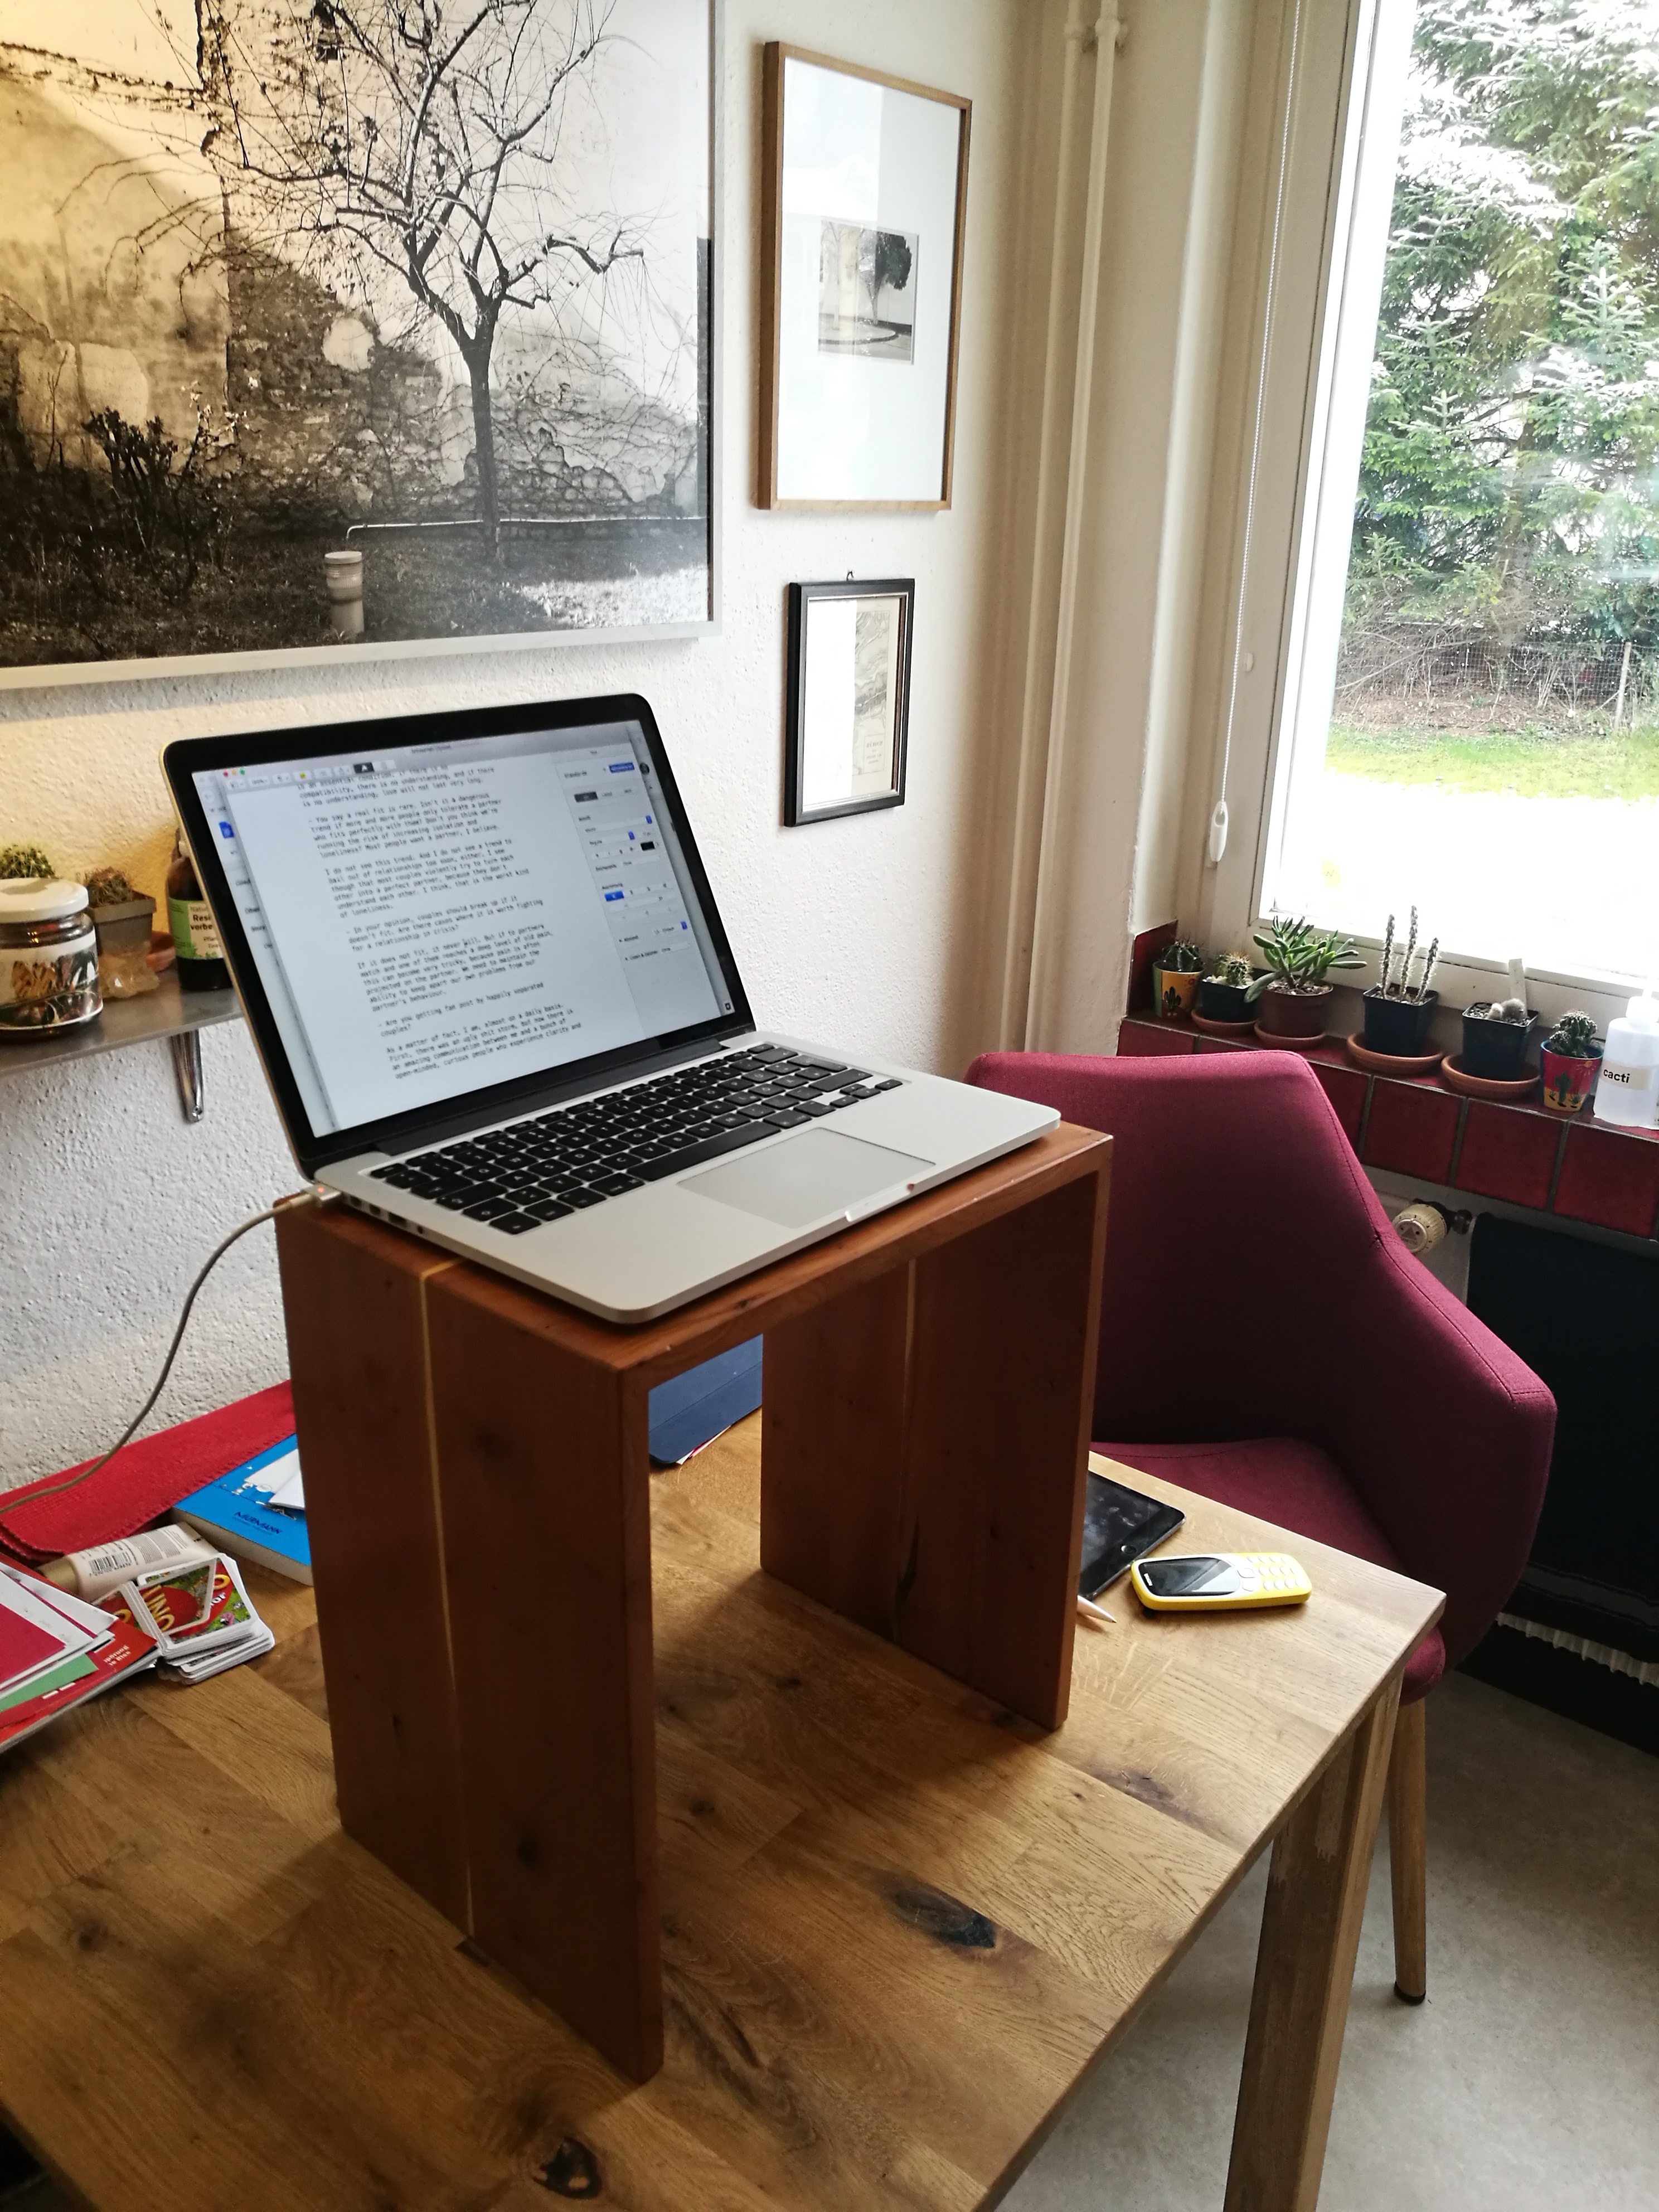 Meyer’s writing environment with an improvised standing desk. He uses Pages for finetuning the layout of his manuscripts.